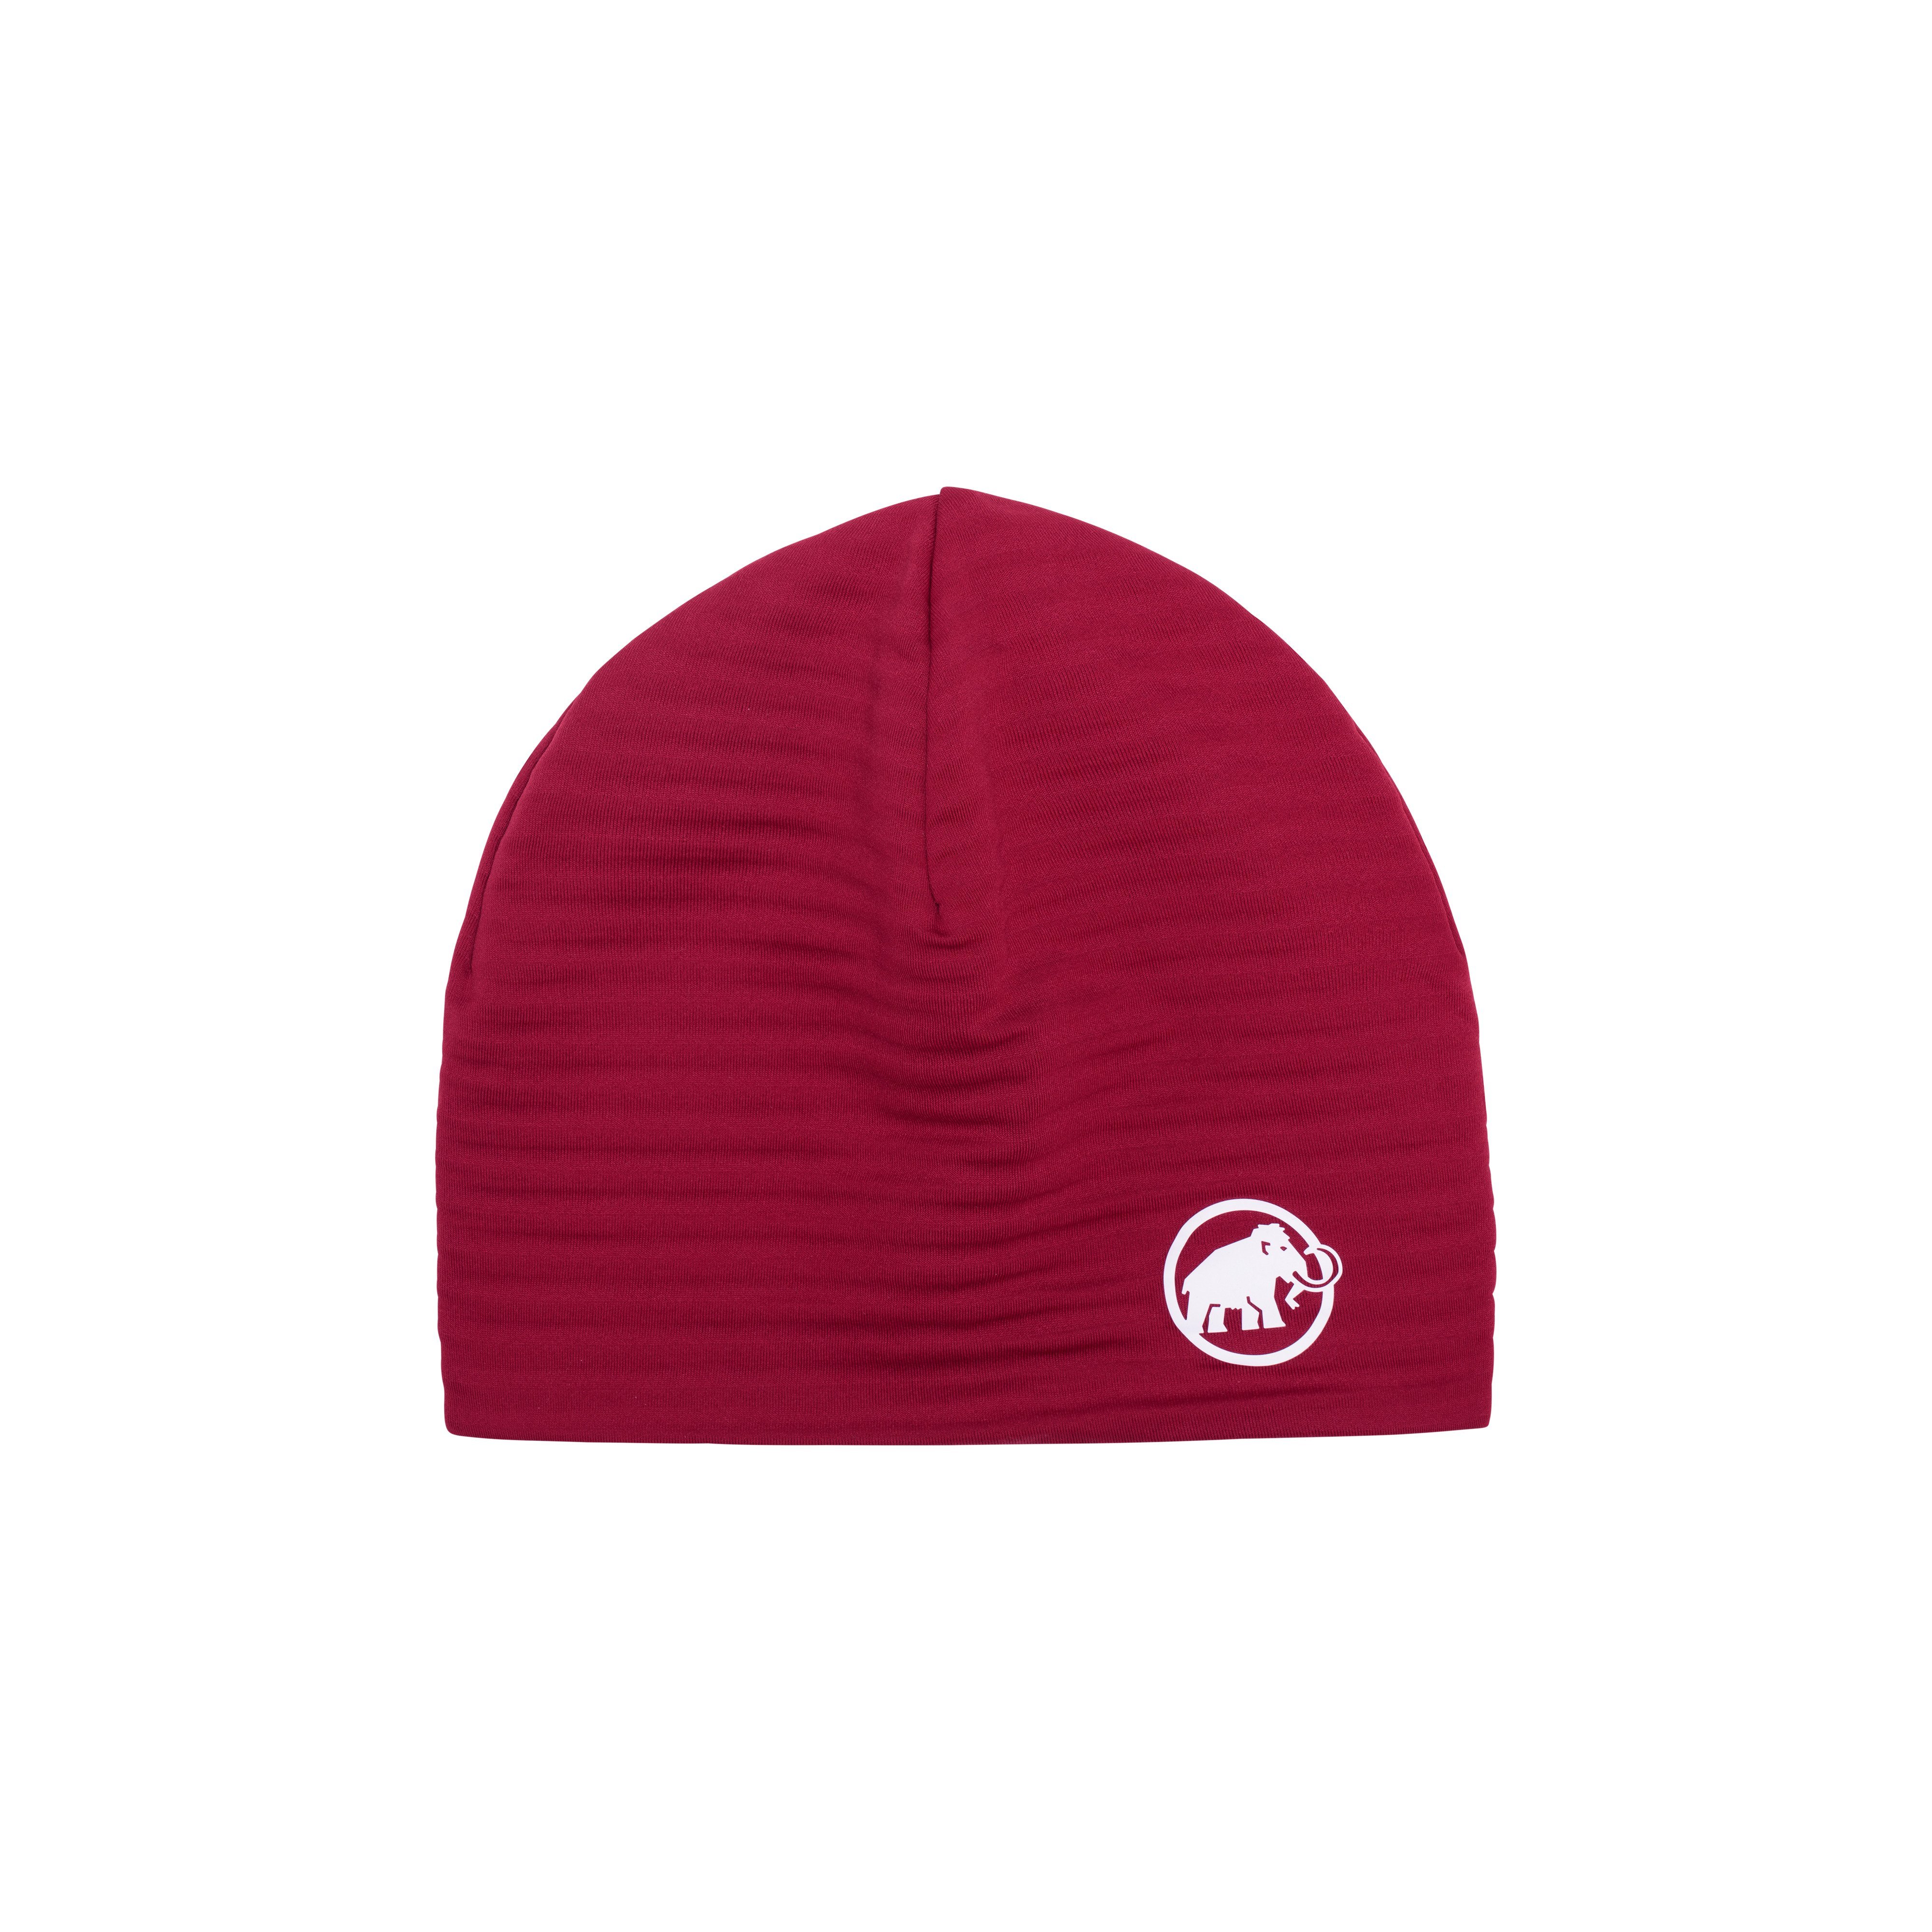 Taiss Light Beanie - blood red, one size product image